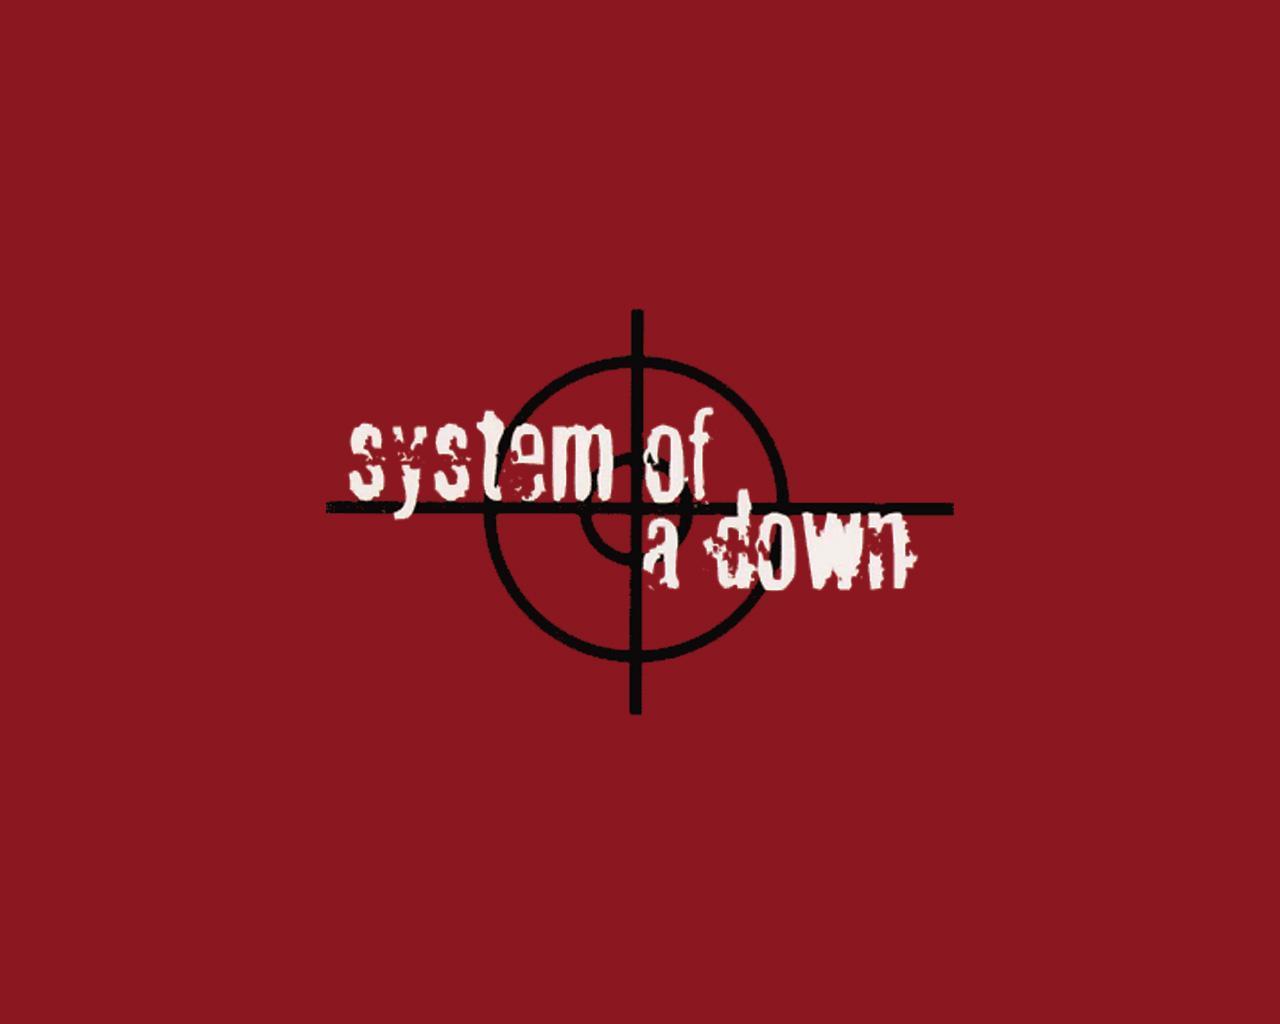 System of a Down - System of a Down Wallpaper (2270584) - Fanpop